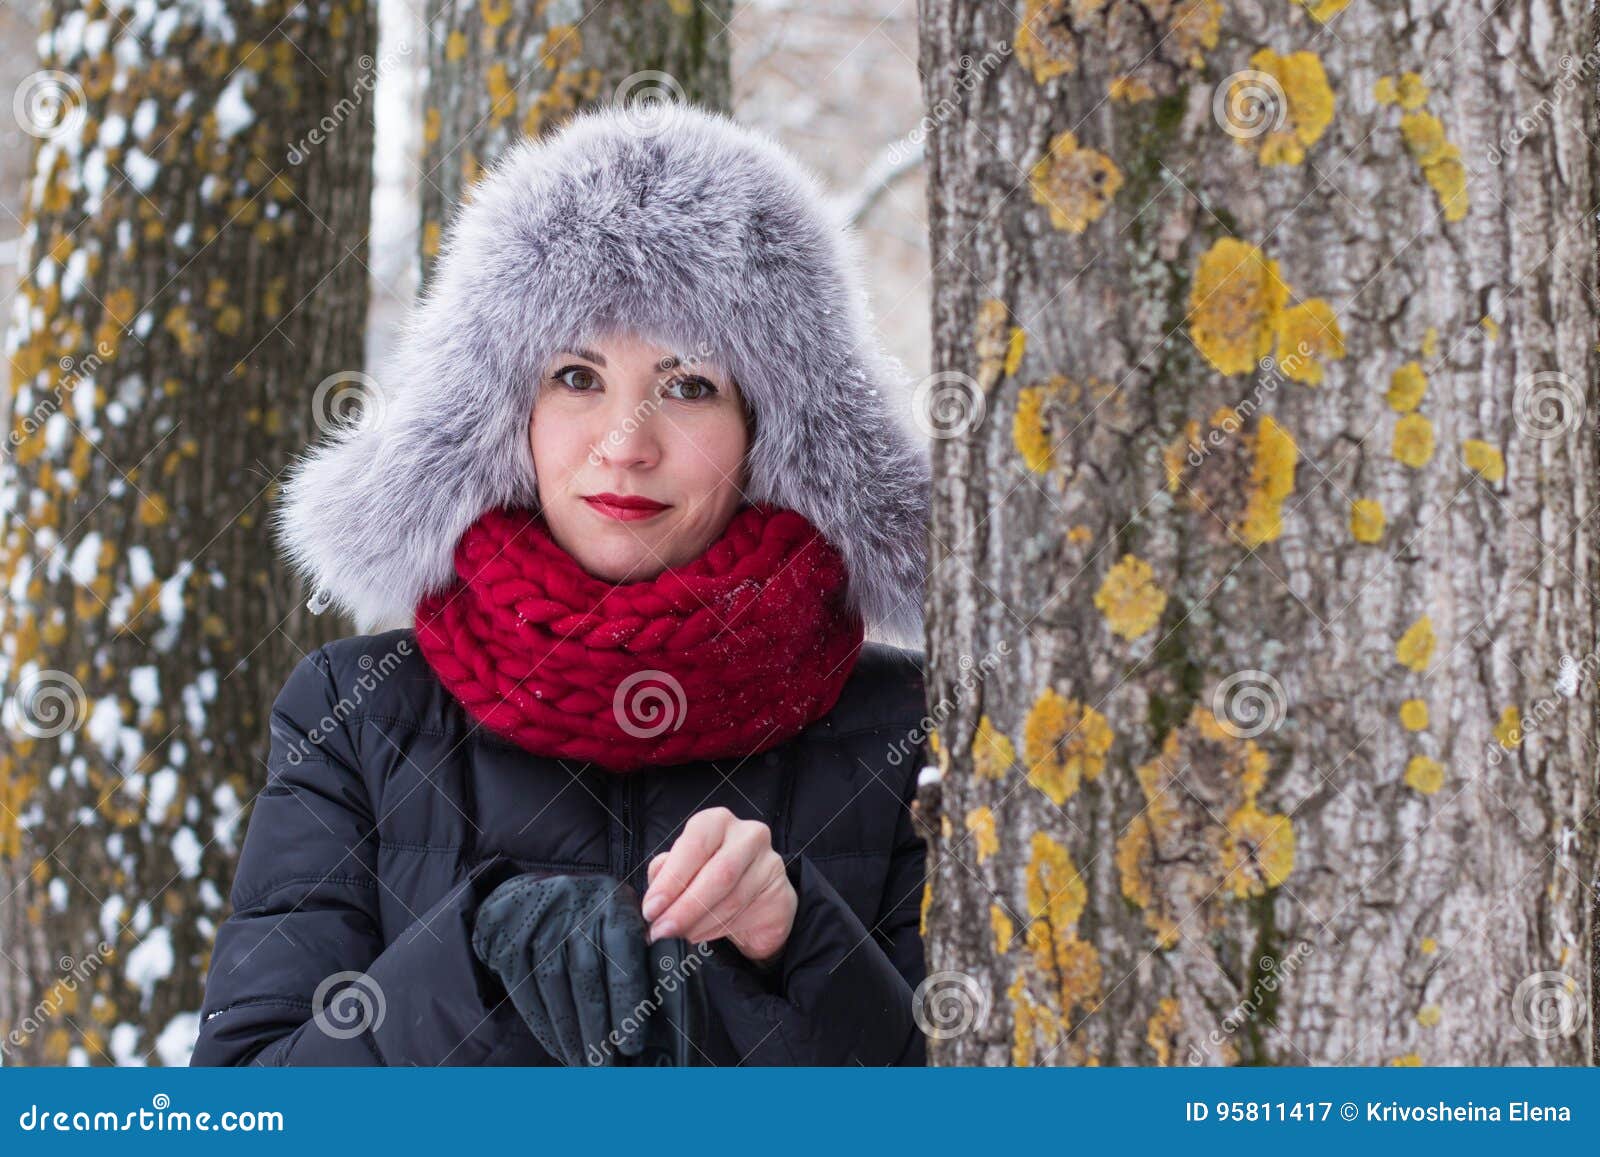 Cute Girl in a Warm Hat in Winter Stock Image - Image of expressive ...